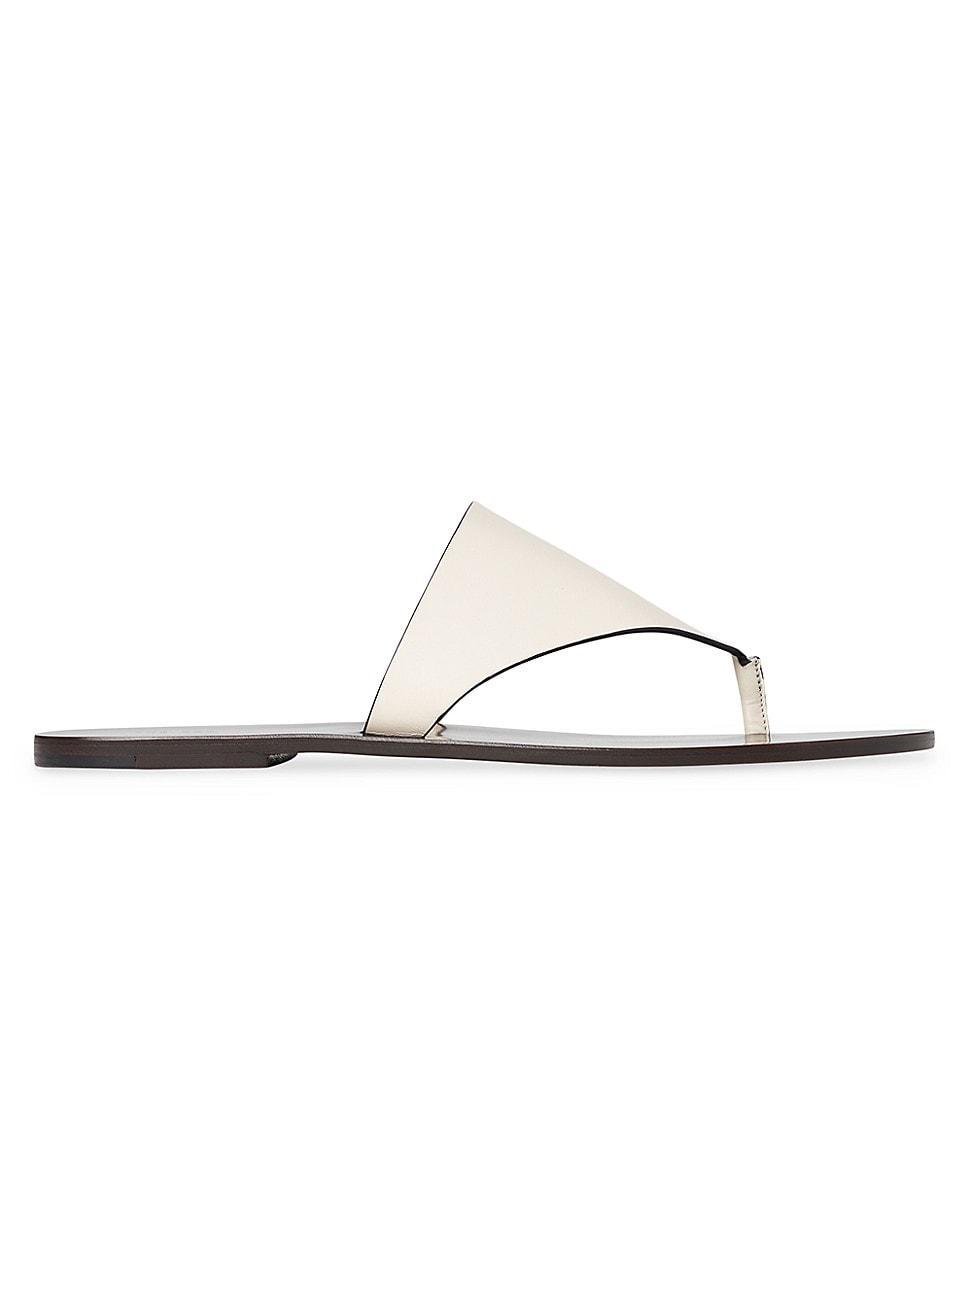 The Row Avery Thong Sandal Product Image